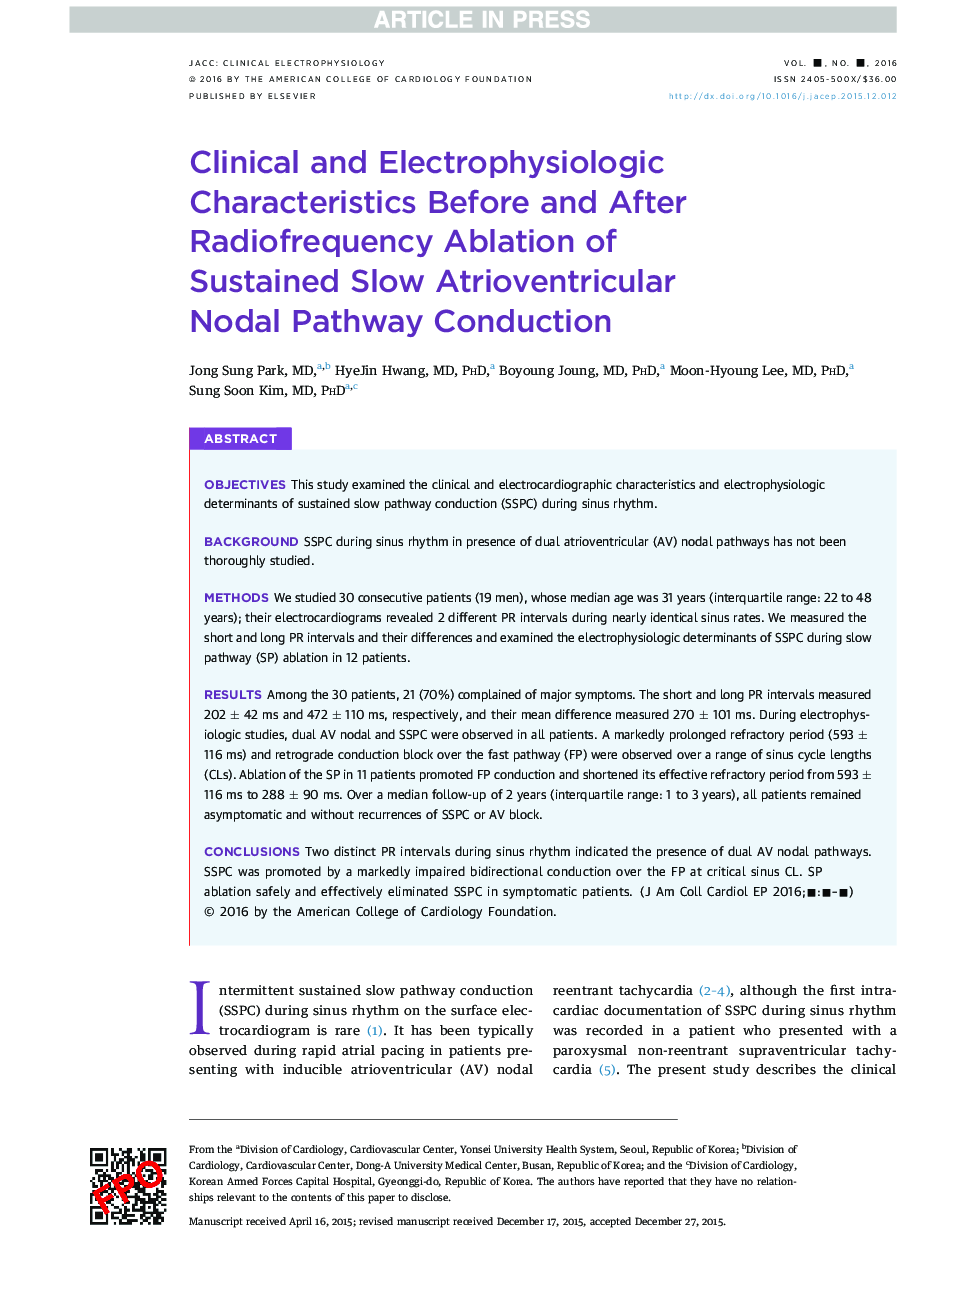 Clinical and Electrophysiologic Characteristics Before and After Radiofrequency Ablation of SustainedÂ Slow Atrioventricular NodalÂ Pathway Conduction